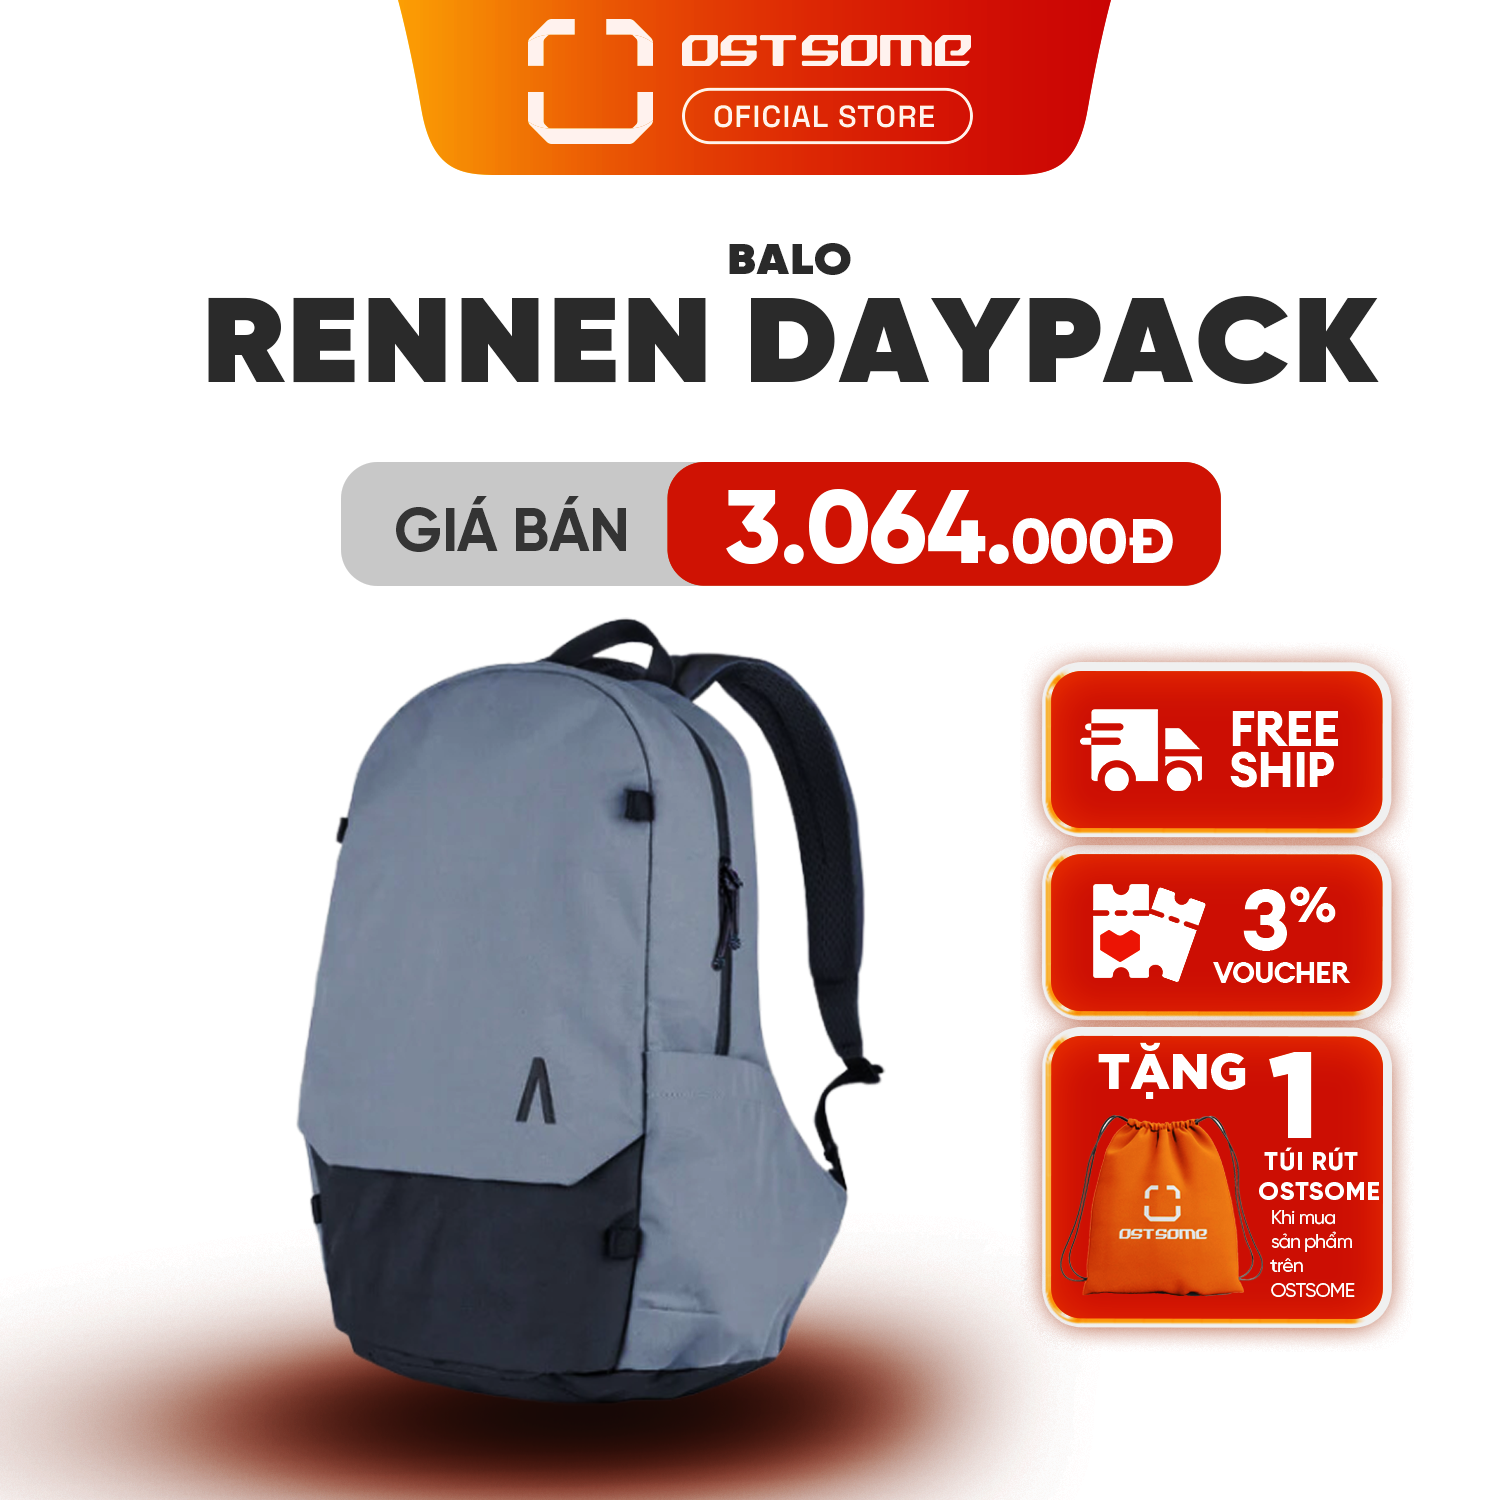 Balo Rennen Recycled Daypack